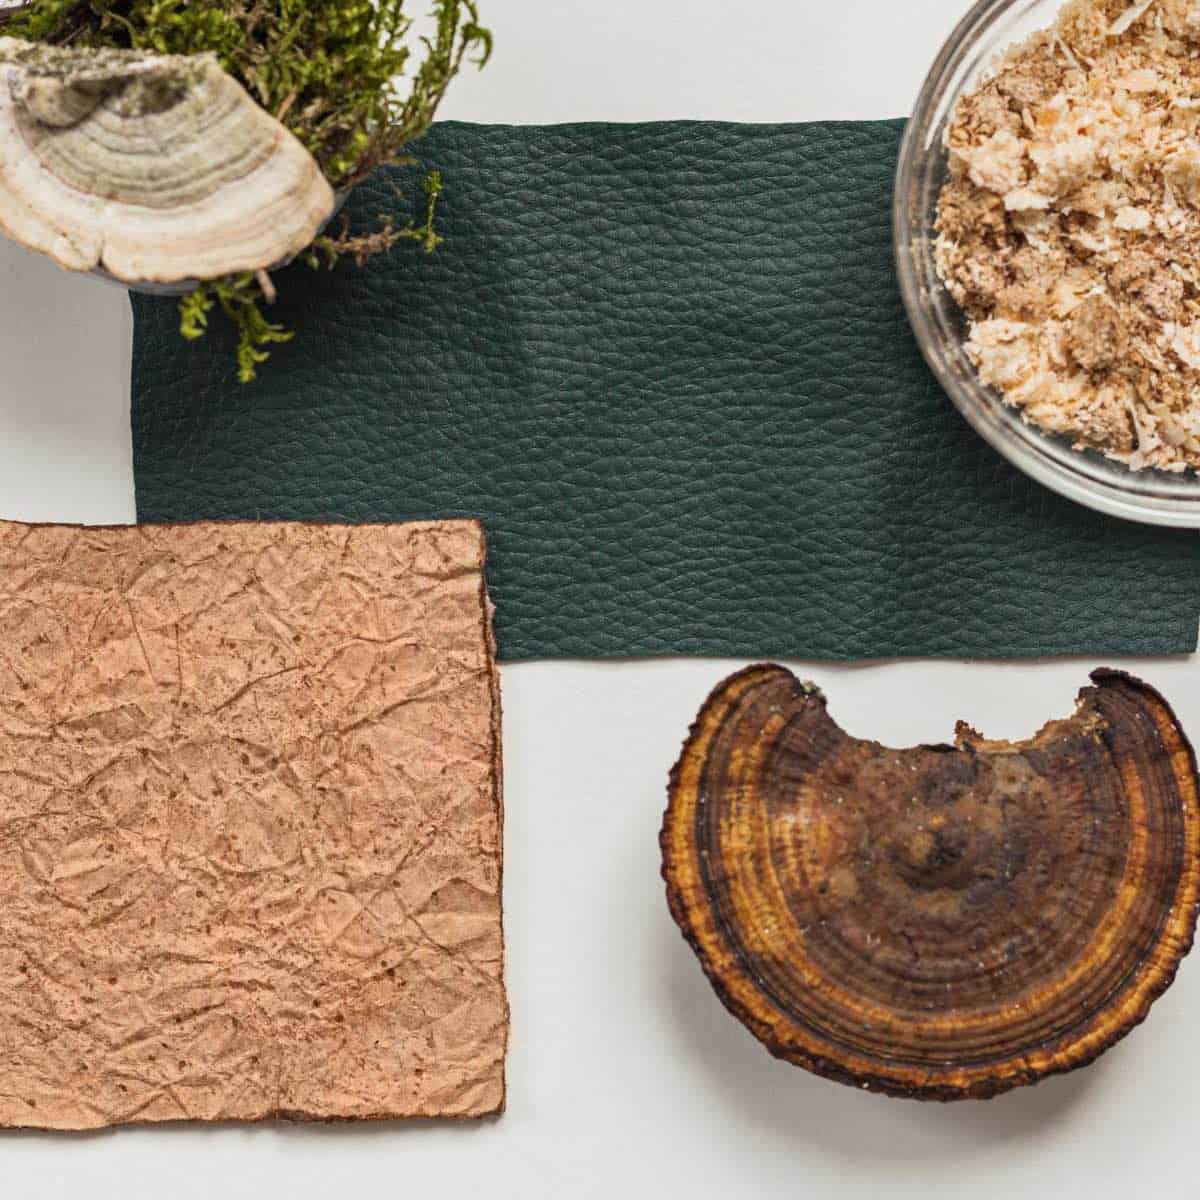 Sustainable eco vegan leather fabric swatches on a table with mushroom.